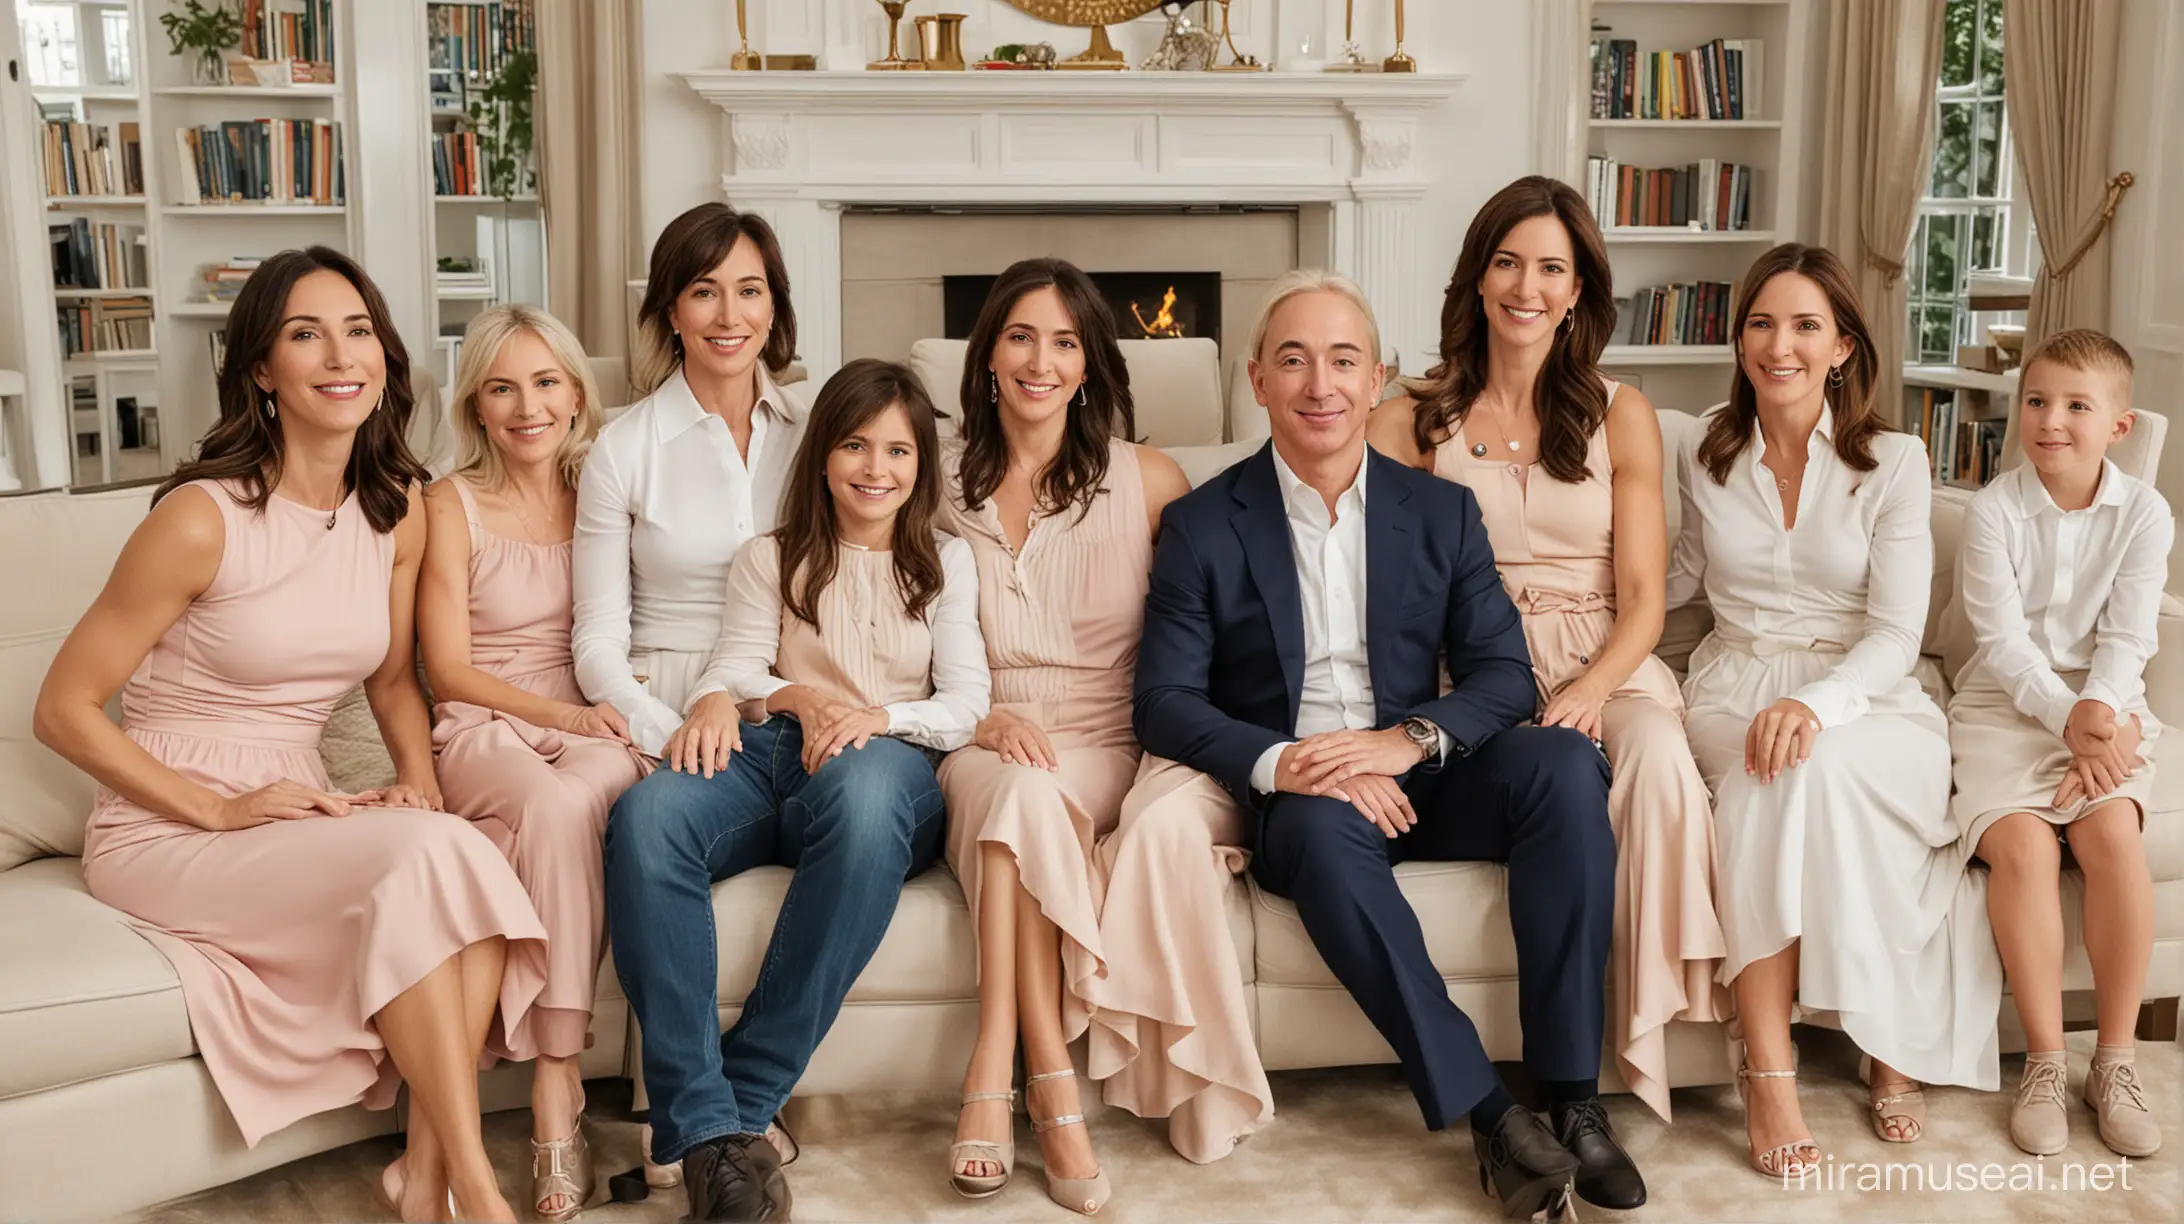 Jeff Bezos Sitting with His Extended Family